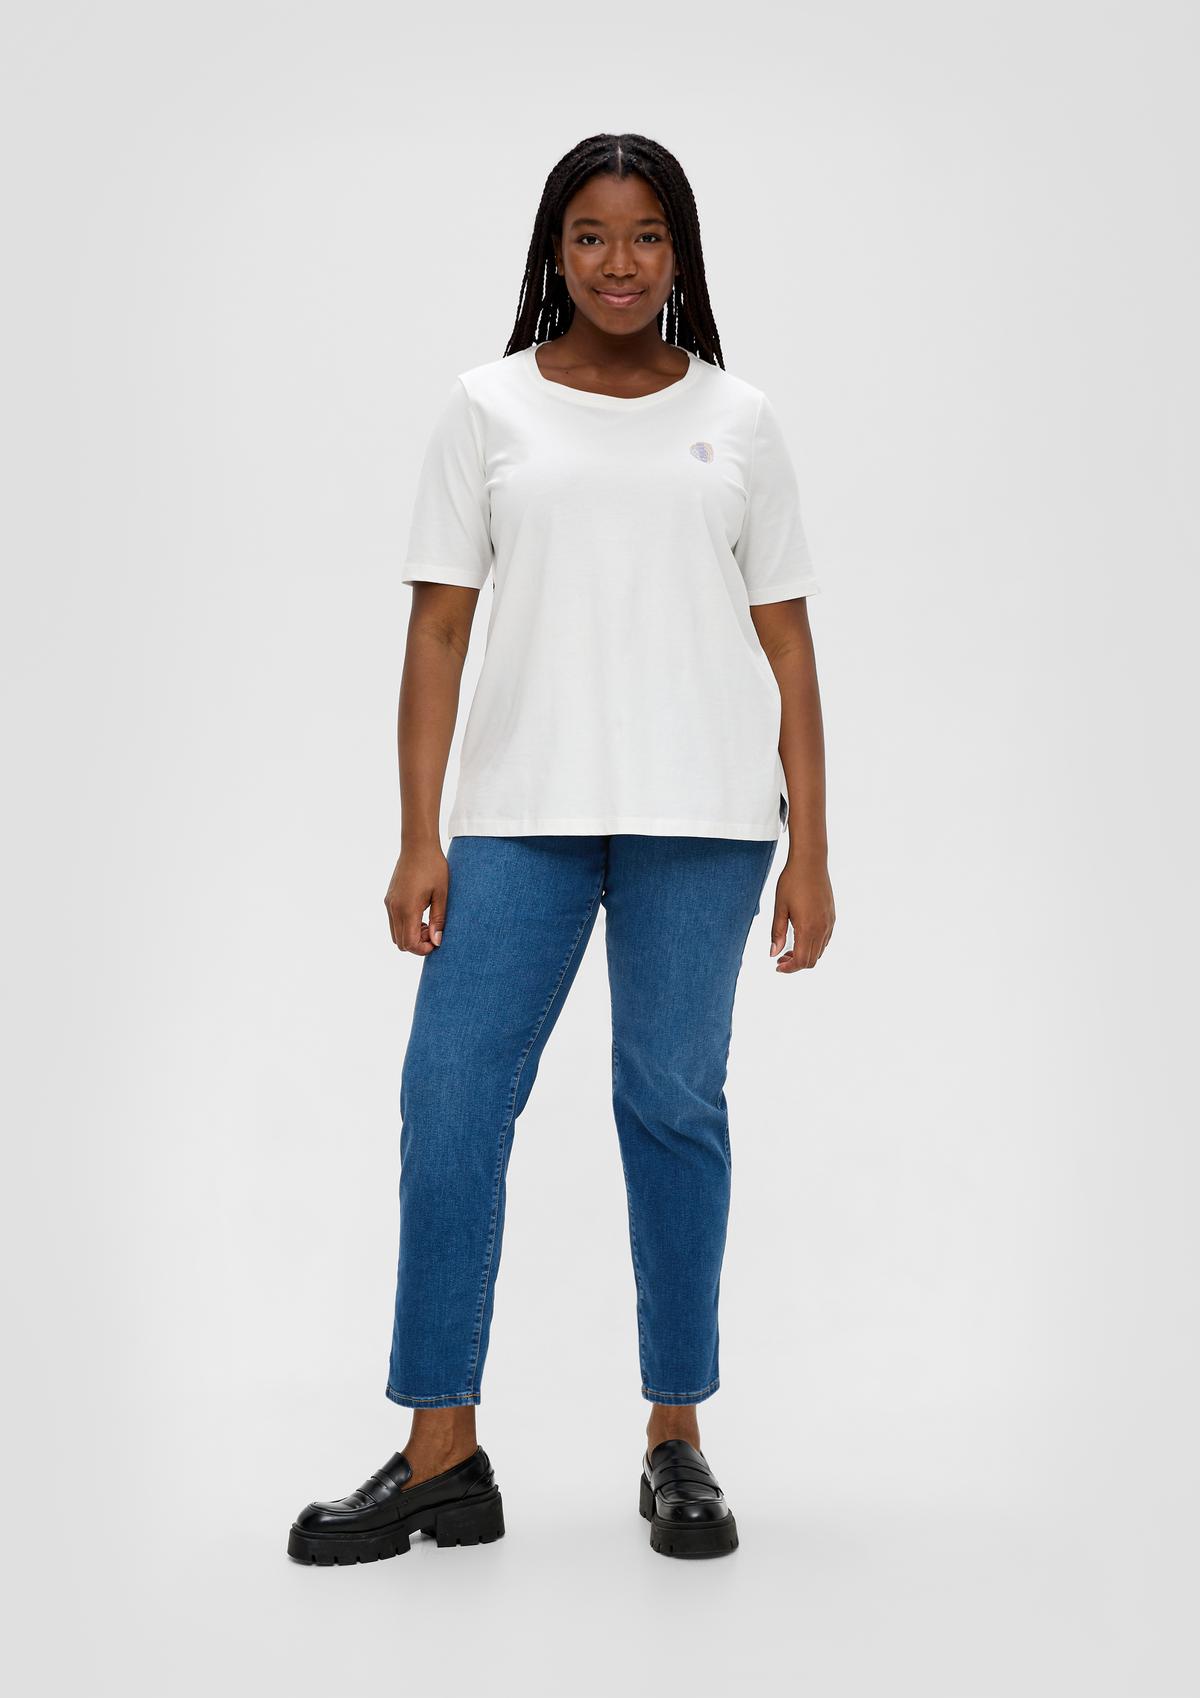 s.Oliver Jeans Curvy / Mid Rise 